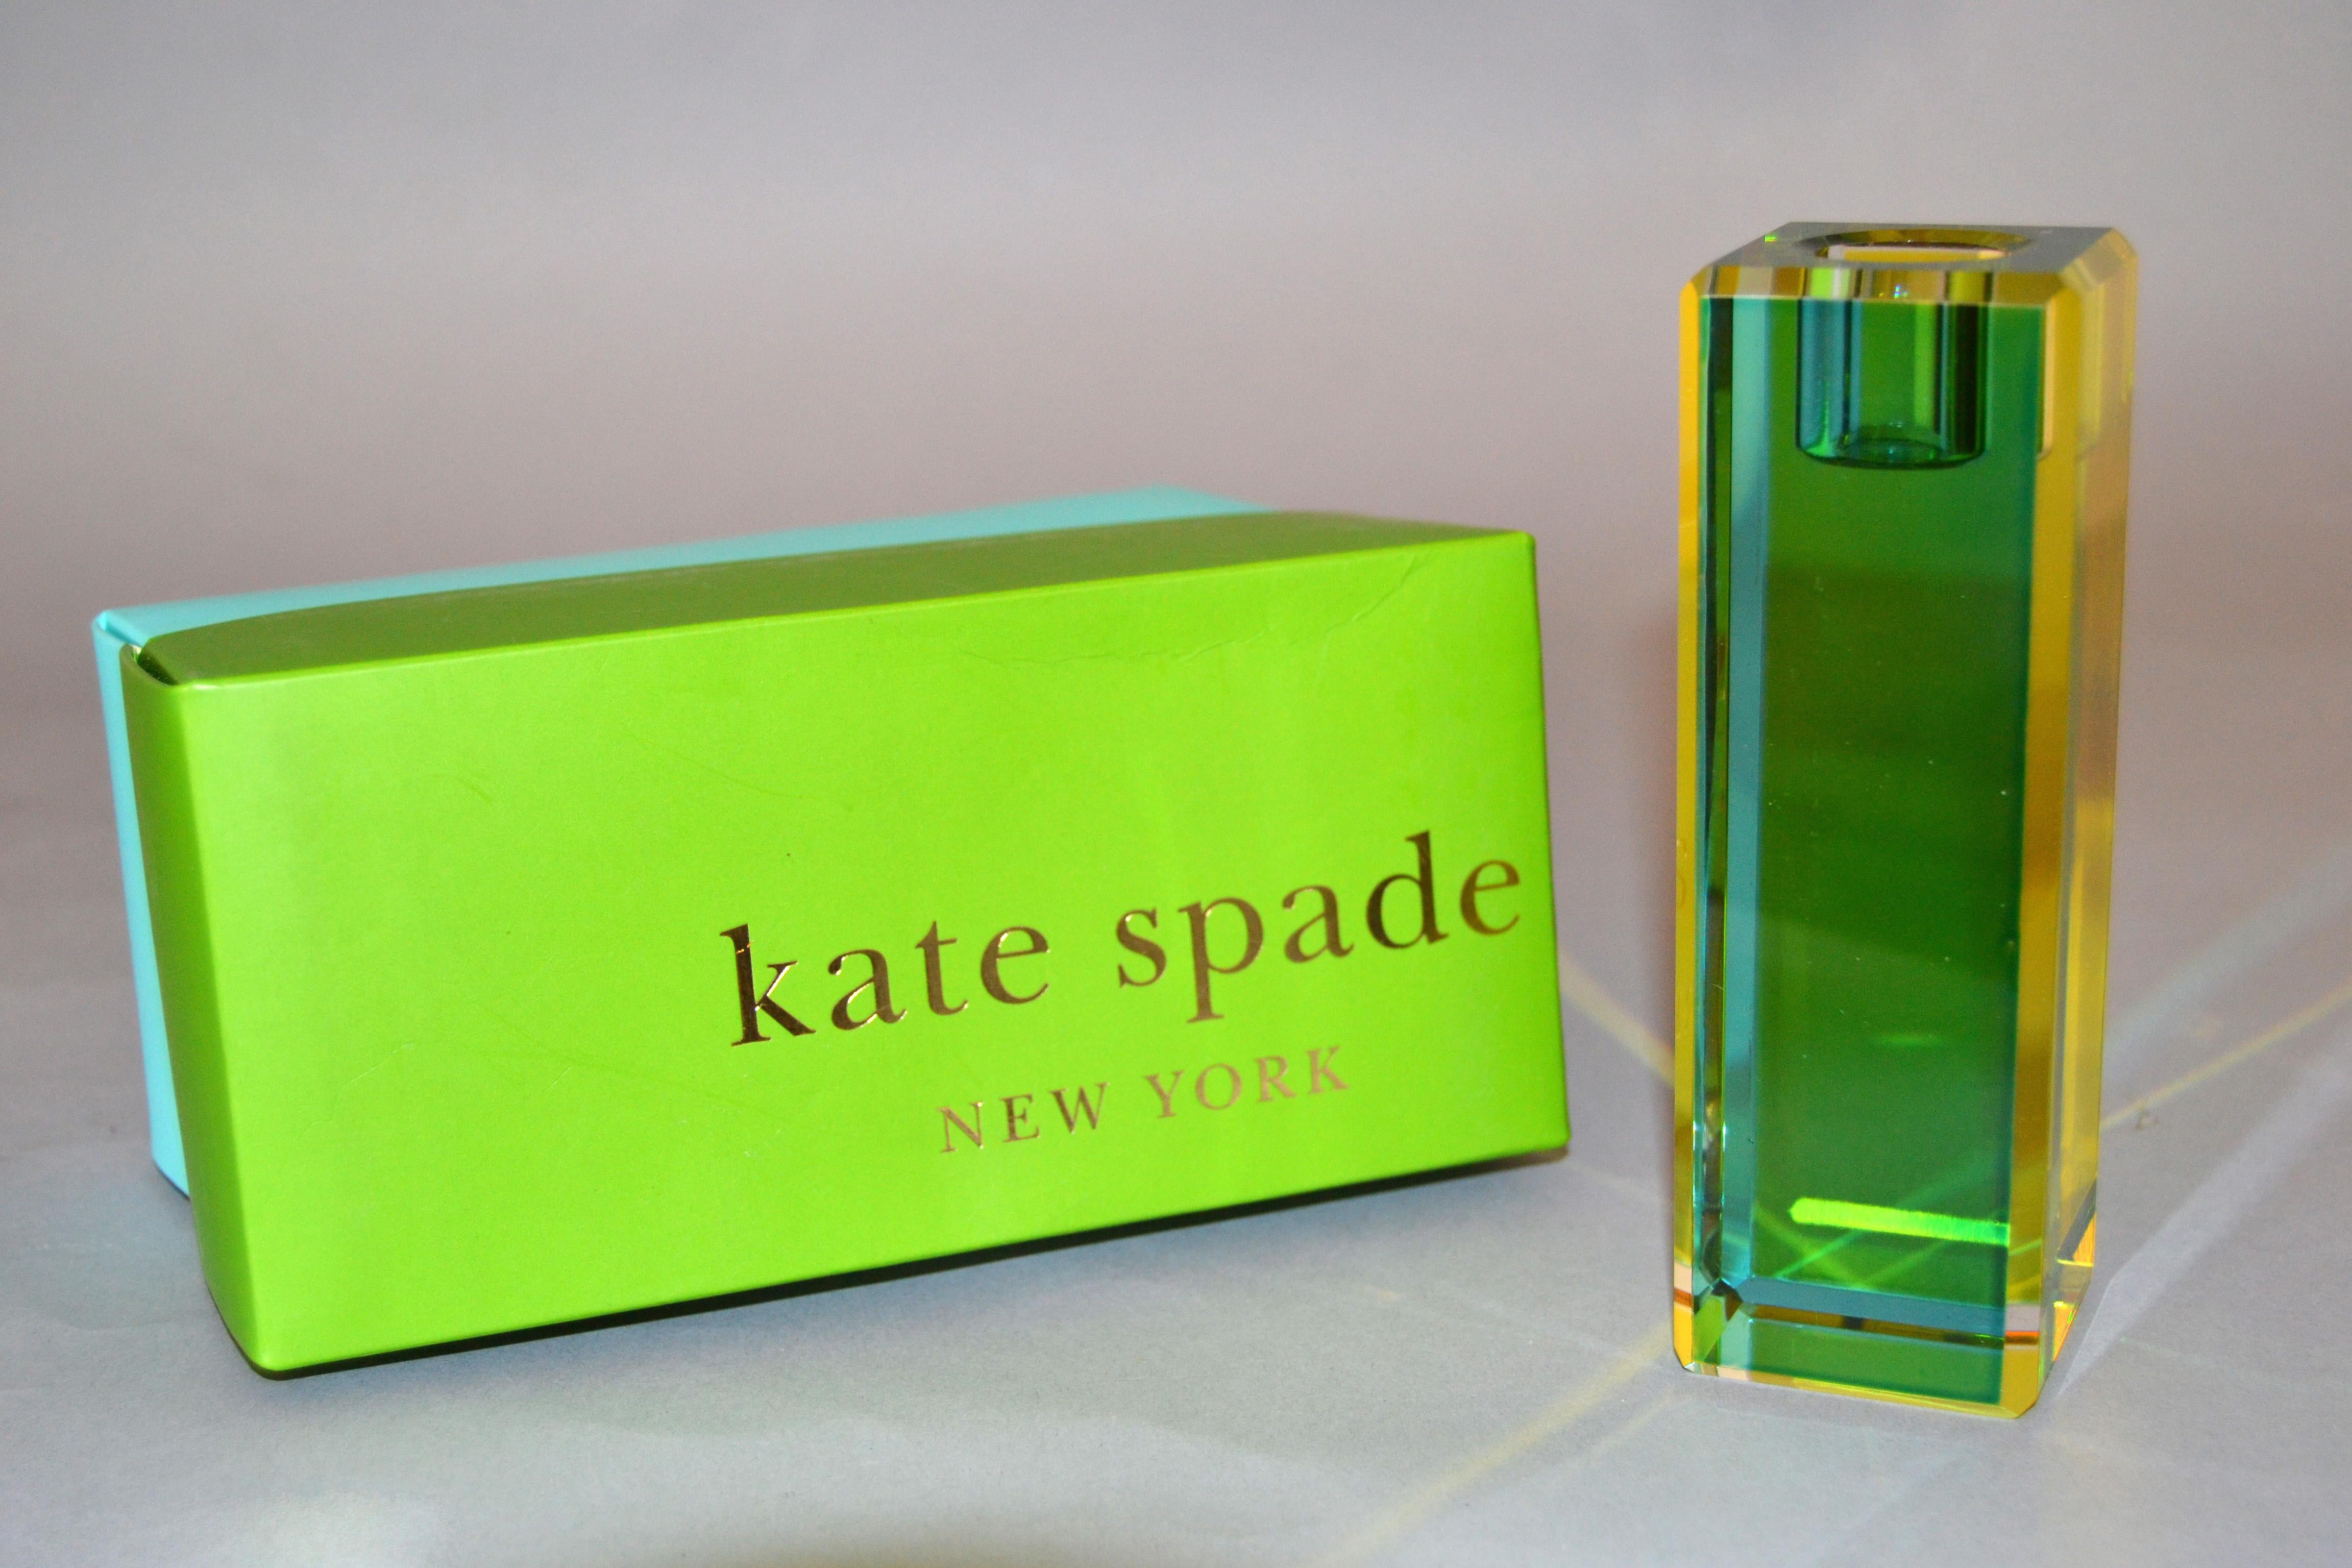 Beautiful modern Kate Spade New York Jules point 5 inches crystal candlestick by Lenox.
The green and blue hue are looking different from every angle.
Makers mark on the candlestick and on the original box.
Note: The box shows some signs of wear.